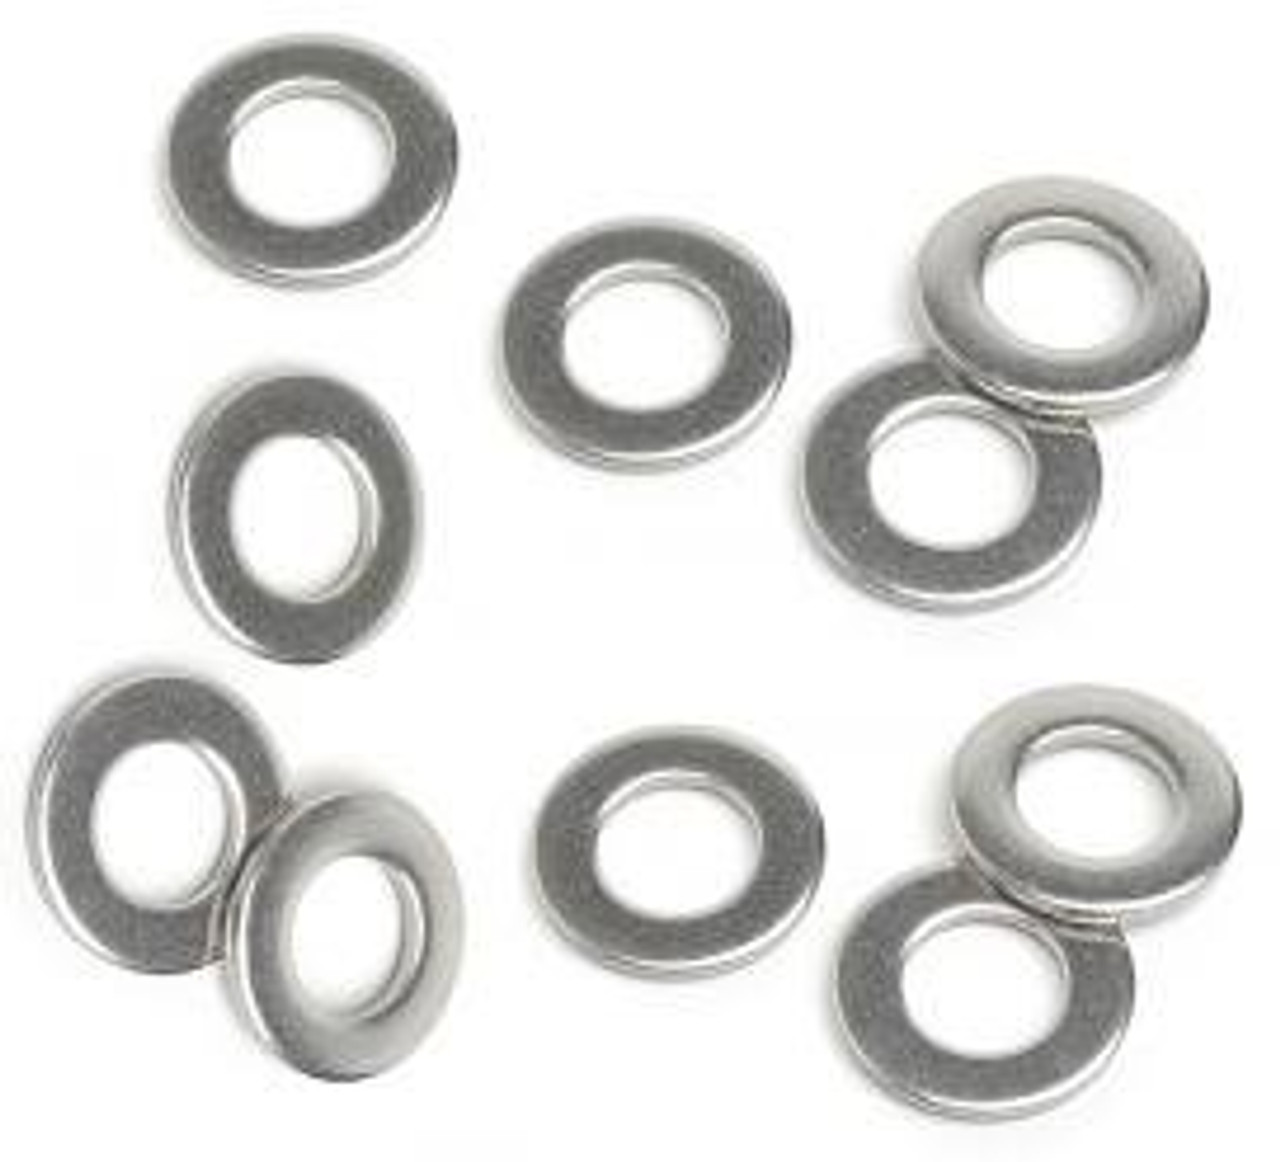 M4 Washer 4.3mm A2 Stainless Steel Form A Thick Flat Washers (50 Pack)